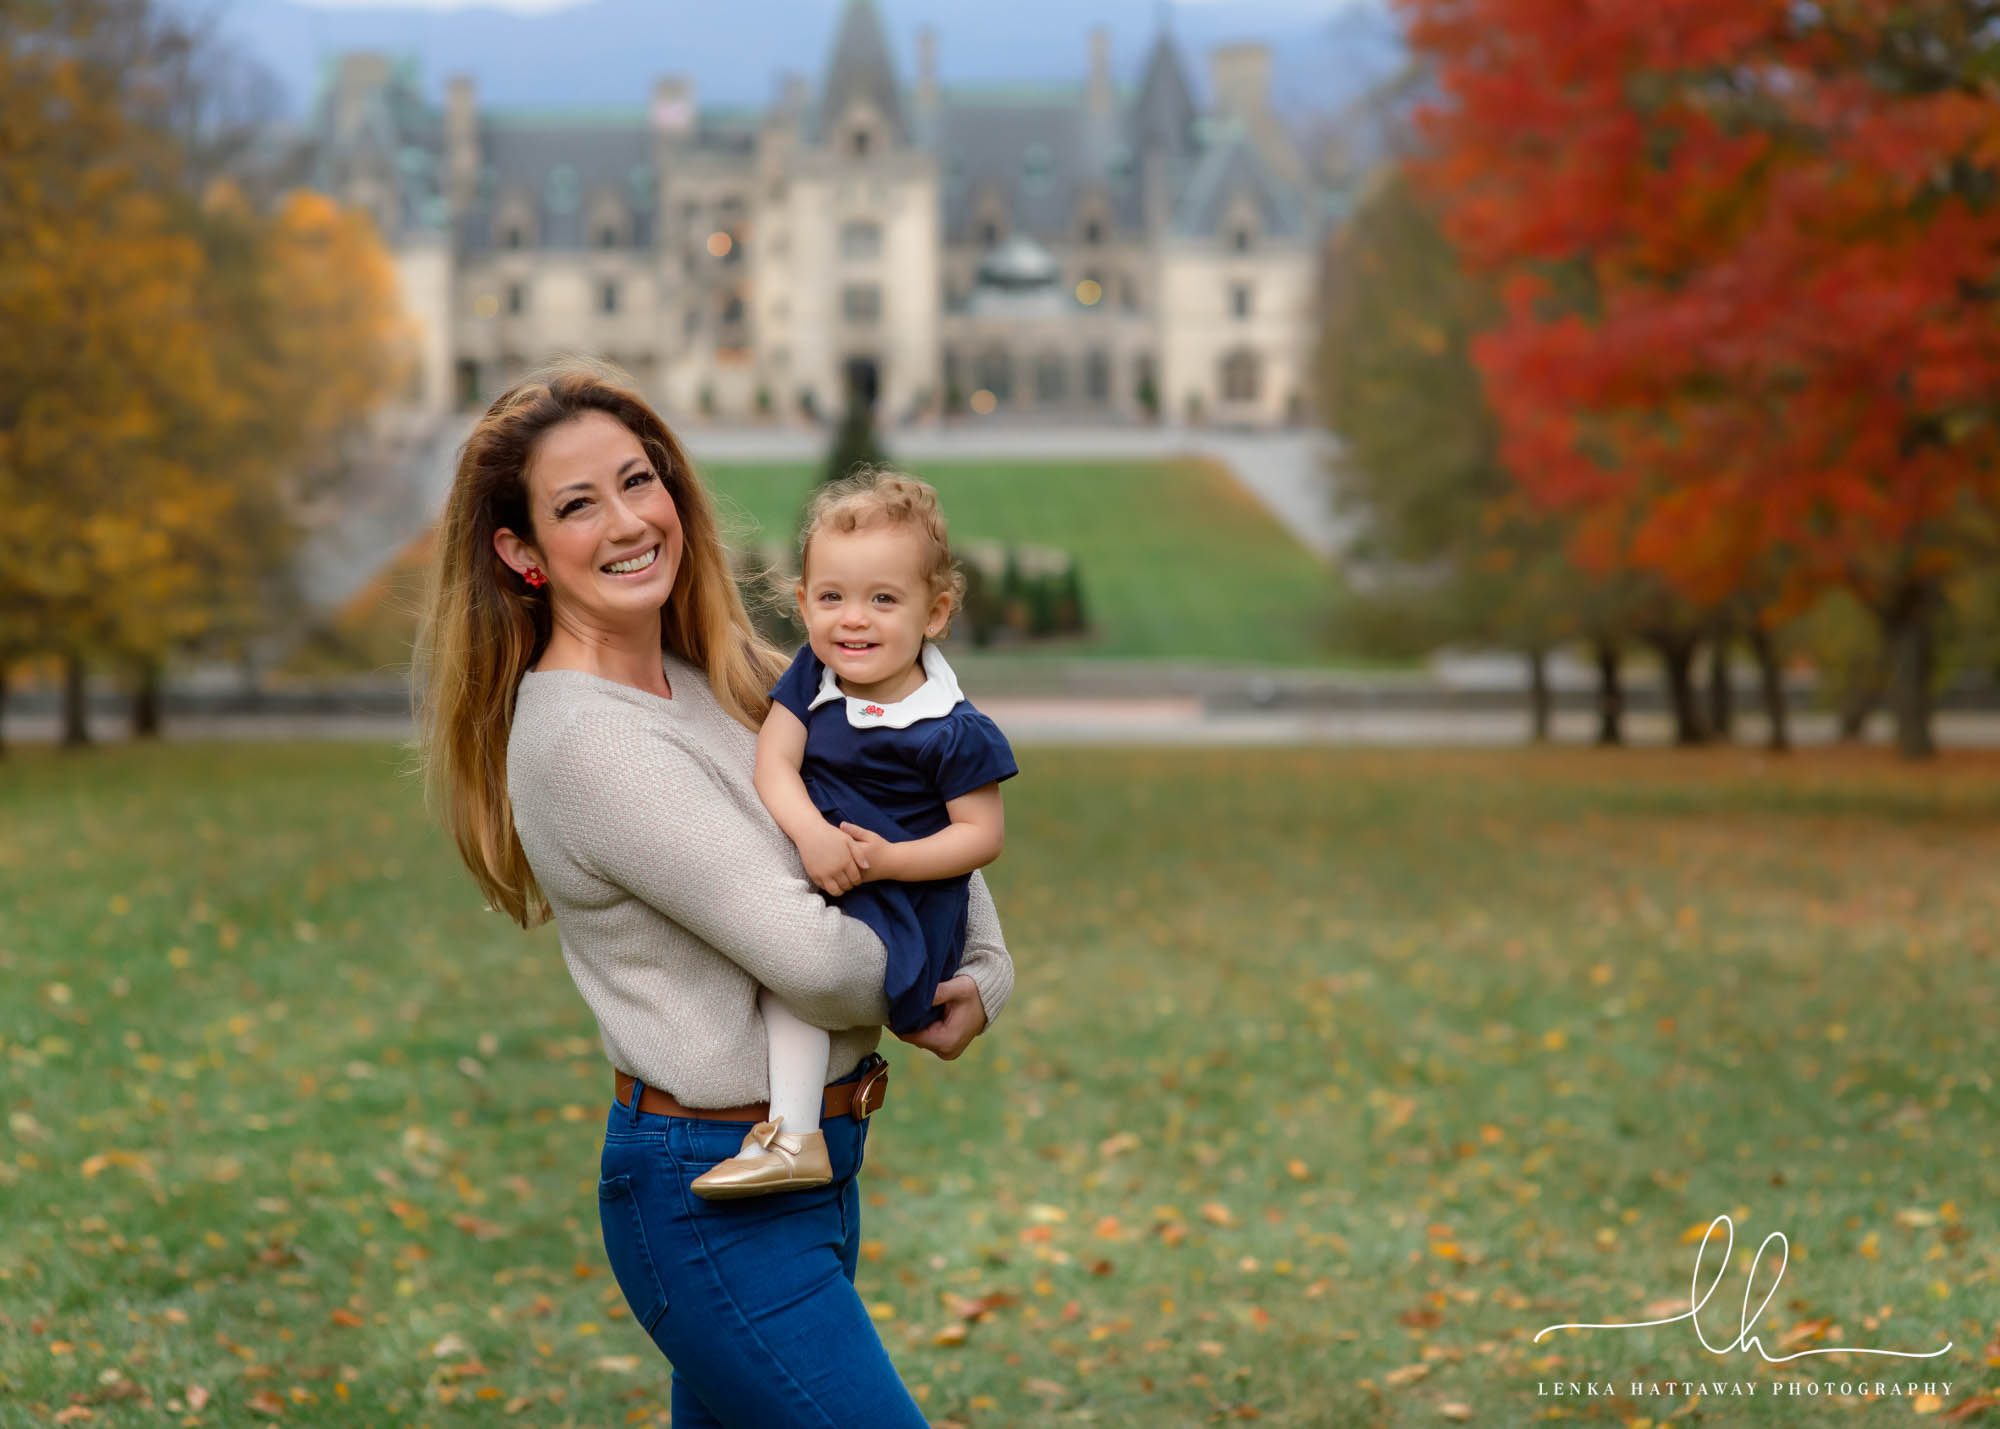 Mom with her baby girl in a photo on Biltmore Estate grounds.